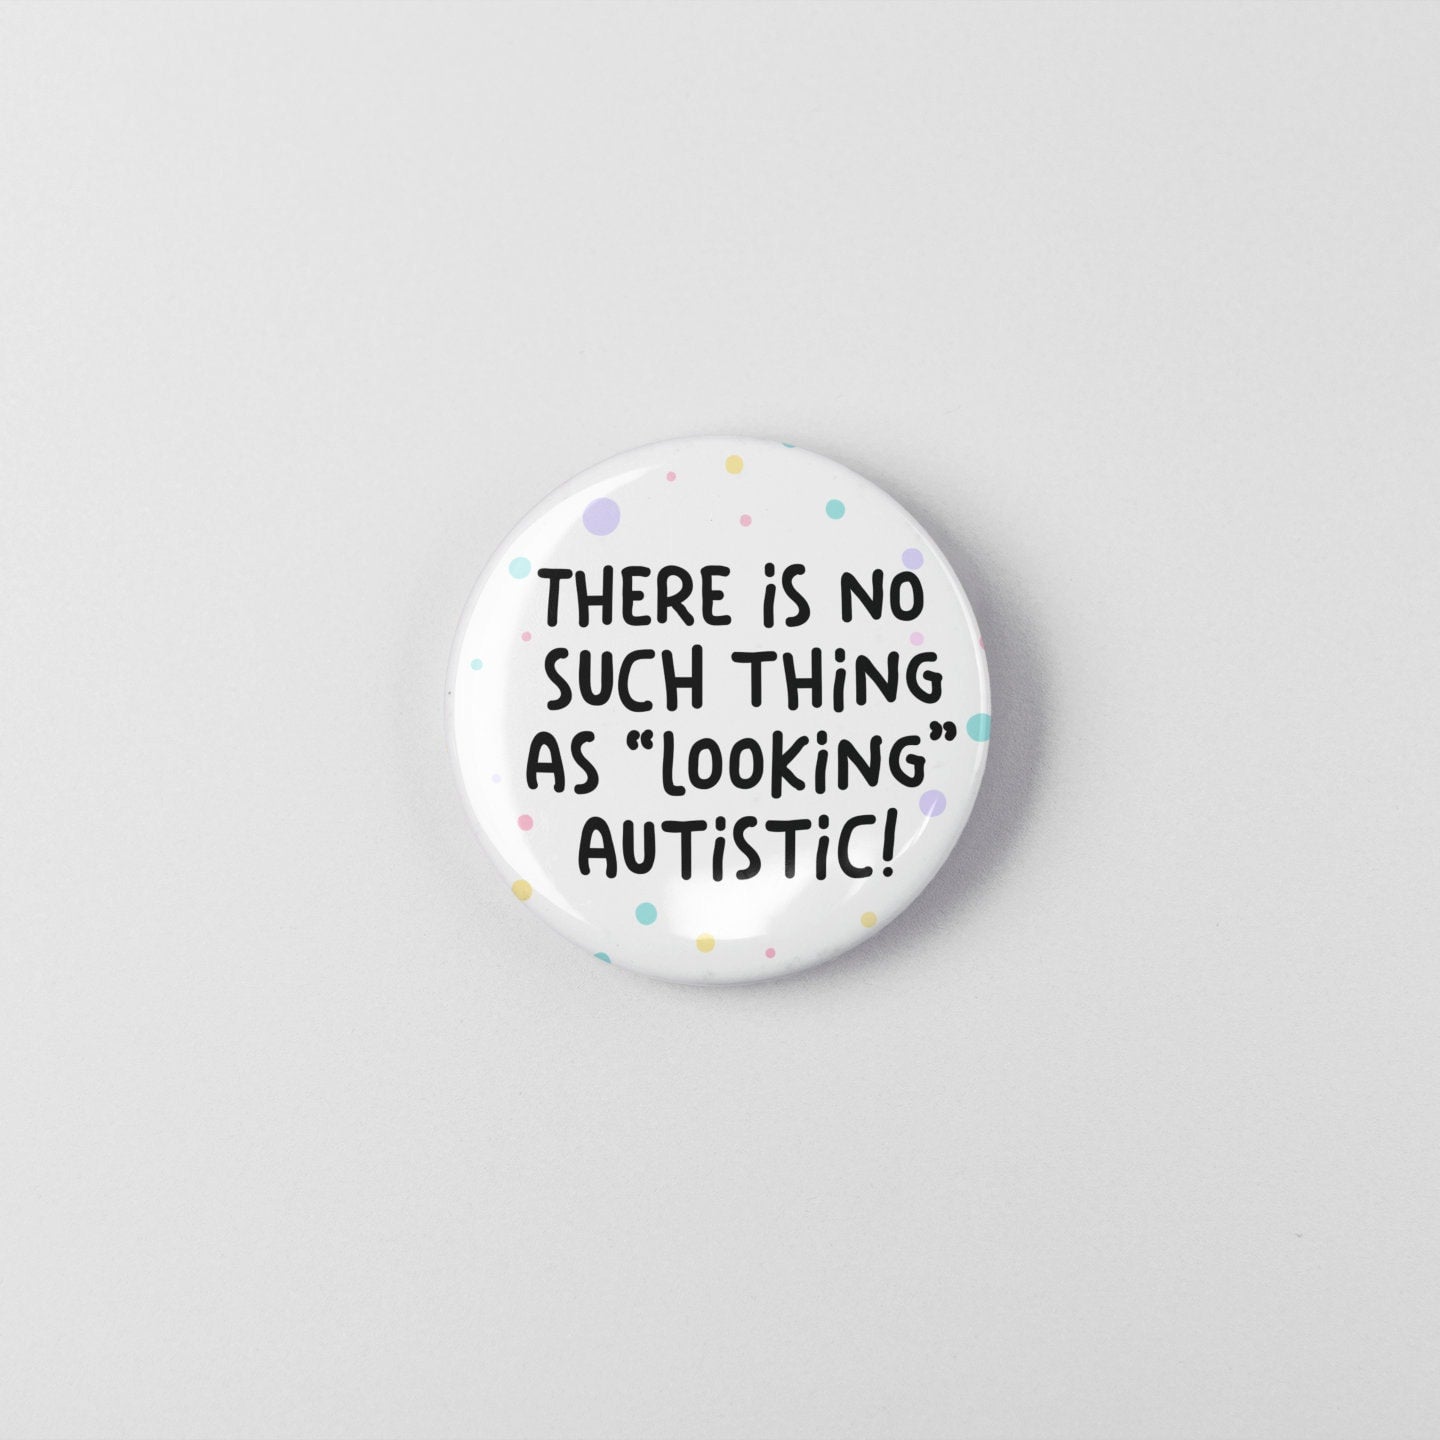 There Is No Such Thing As "Looking" Autistic - Badge Pin | Autism Awareness